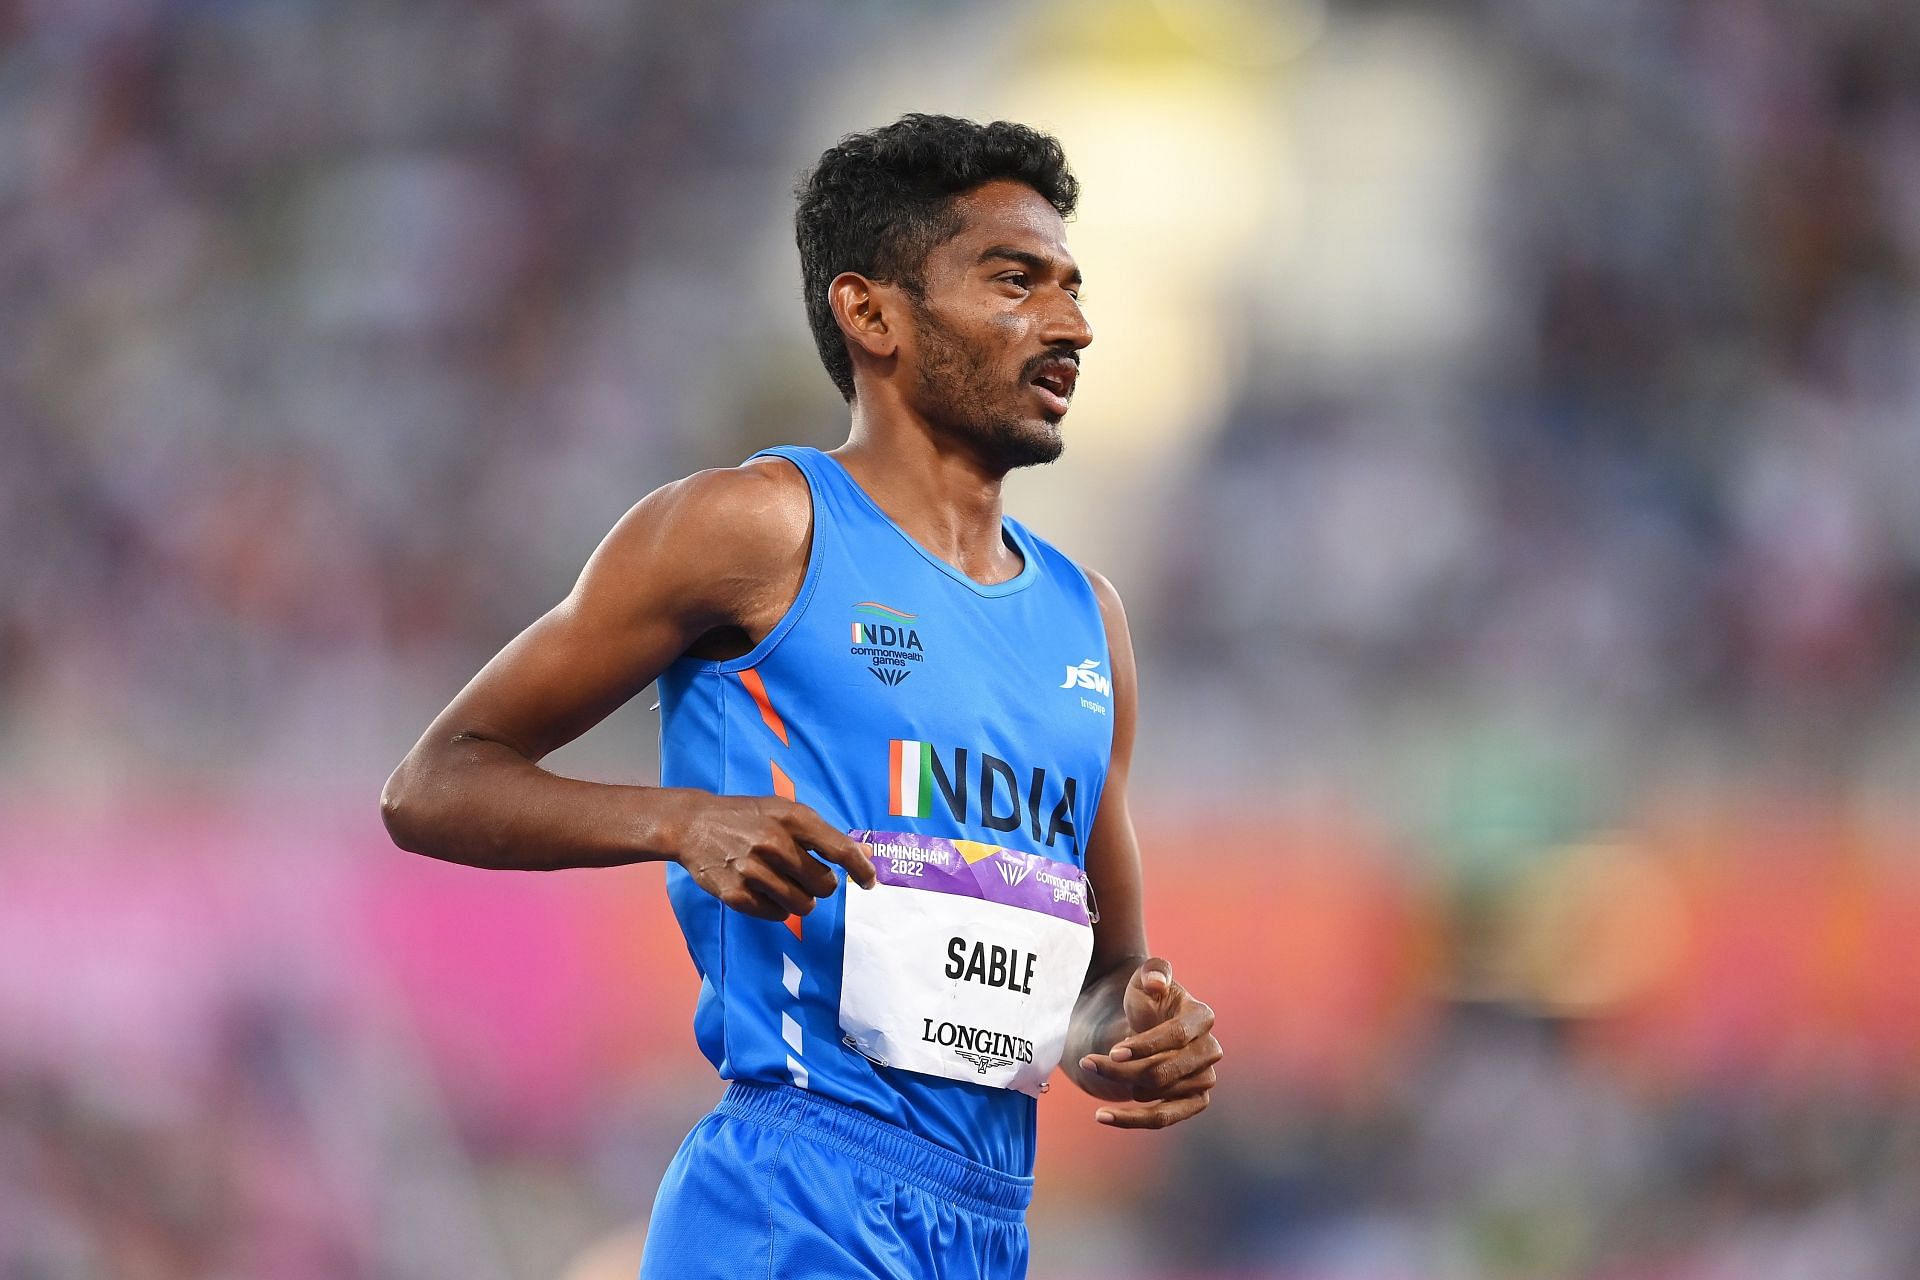 Avinash Sable in action at the 2022 Commonwealth Games in Birmingham, England.